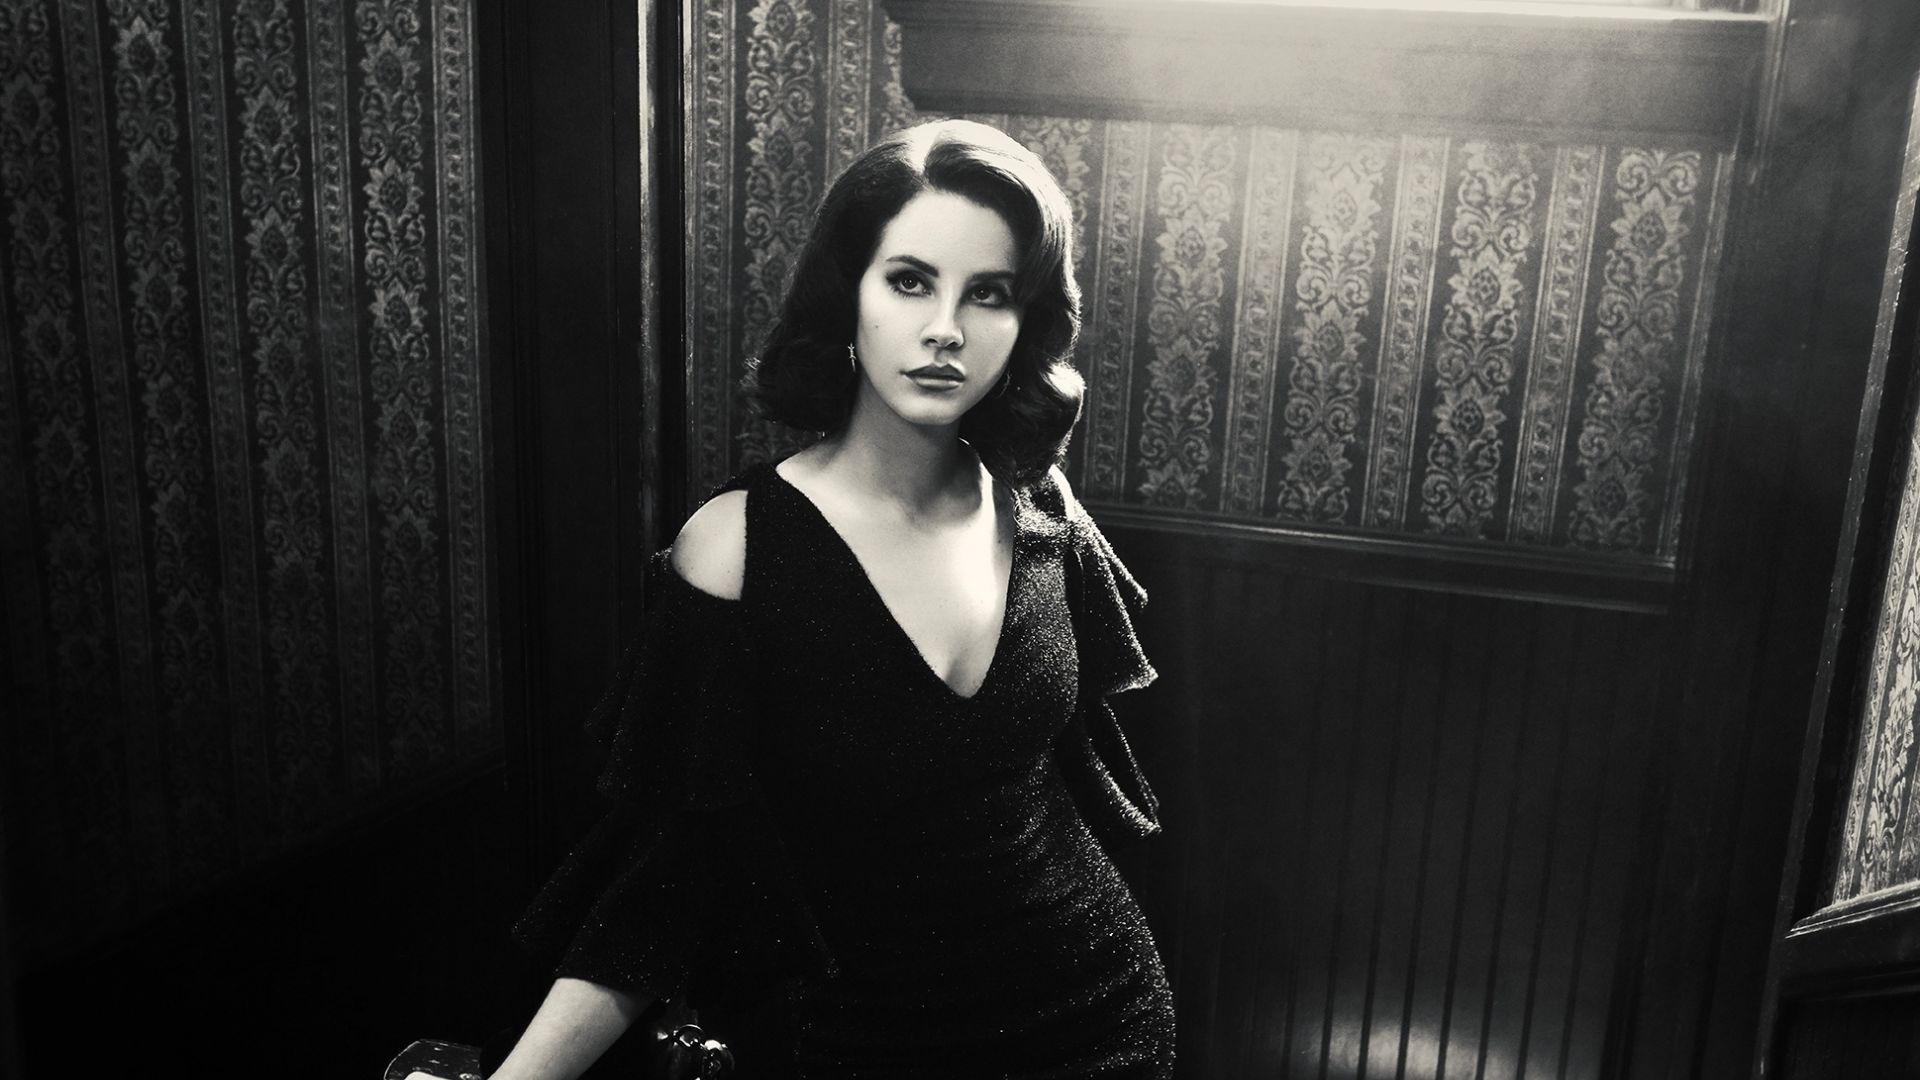 Desktop wallpaper black and white, lana del rey, american singer, HD image, picture, background, a6ab27